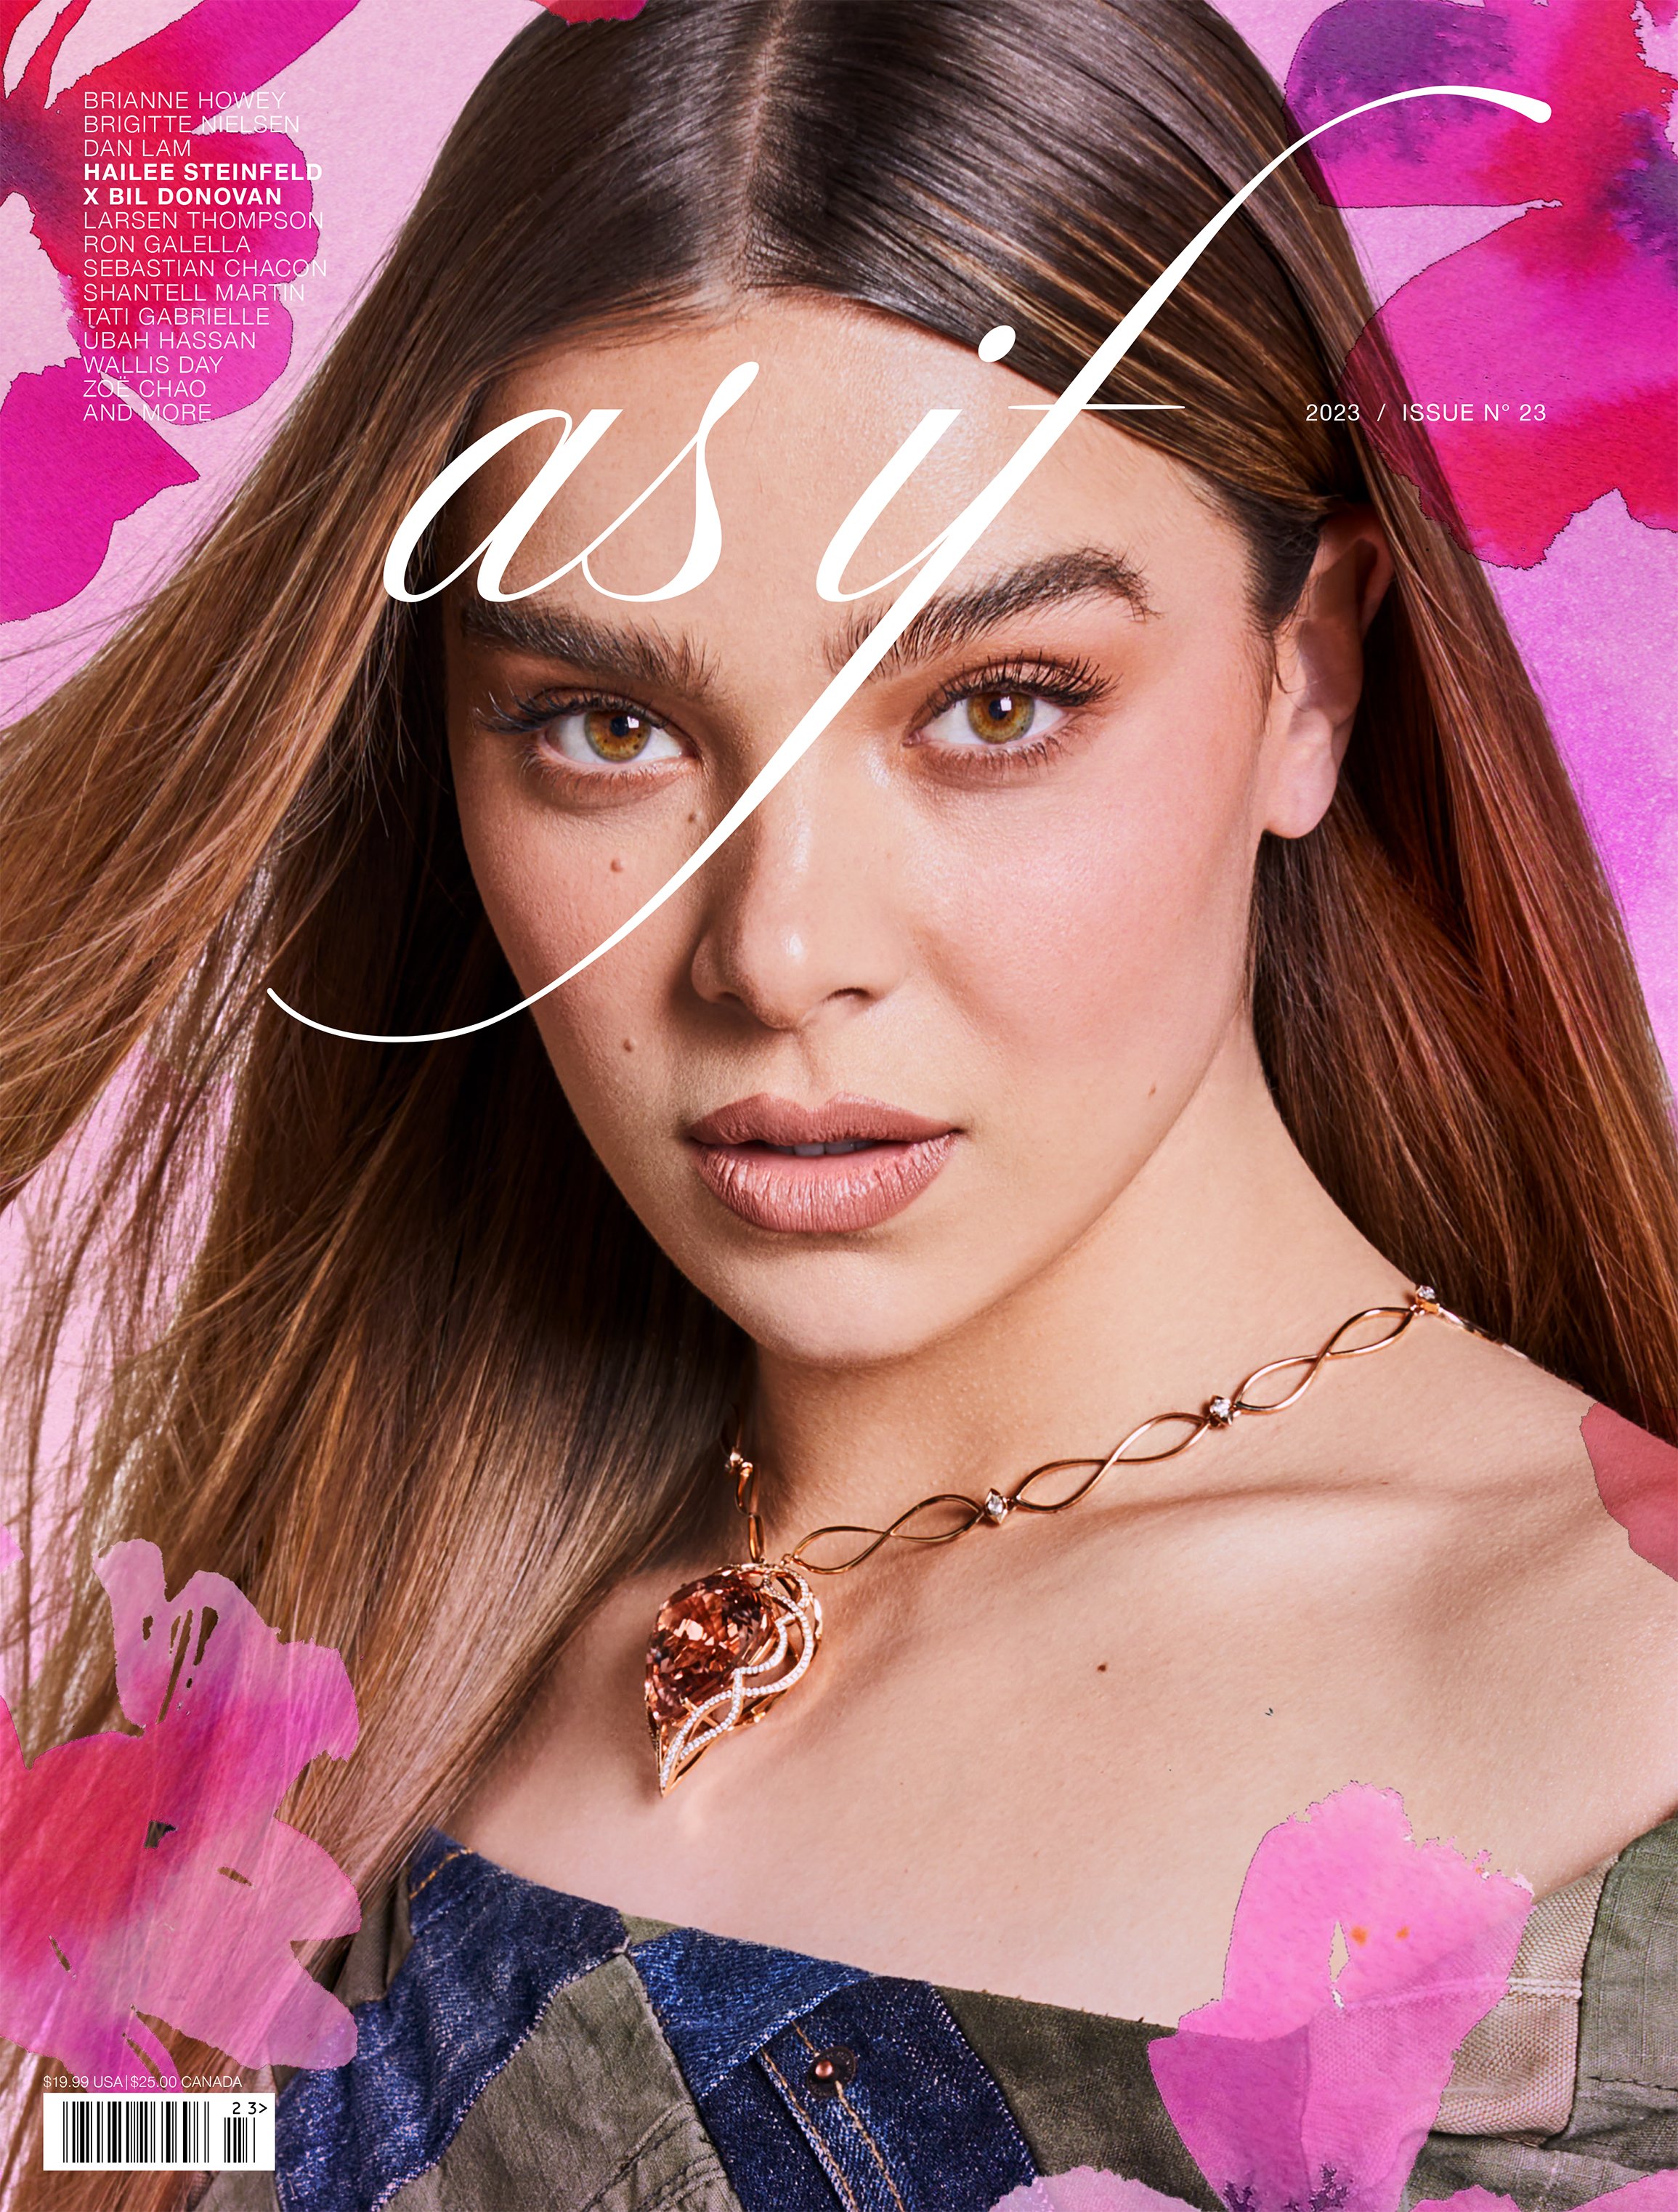 Hailee Steinfeld Cover AS IF Magazine